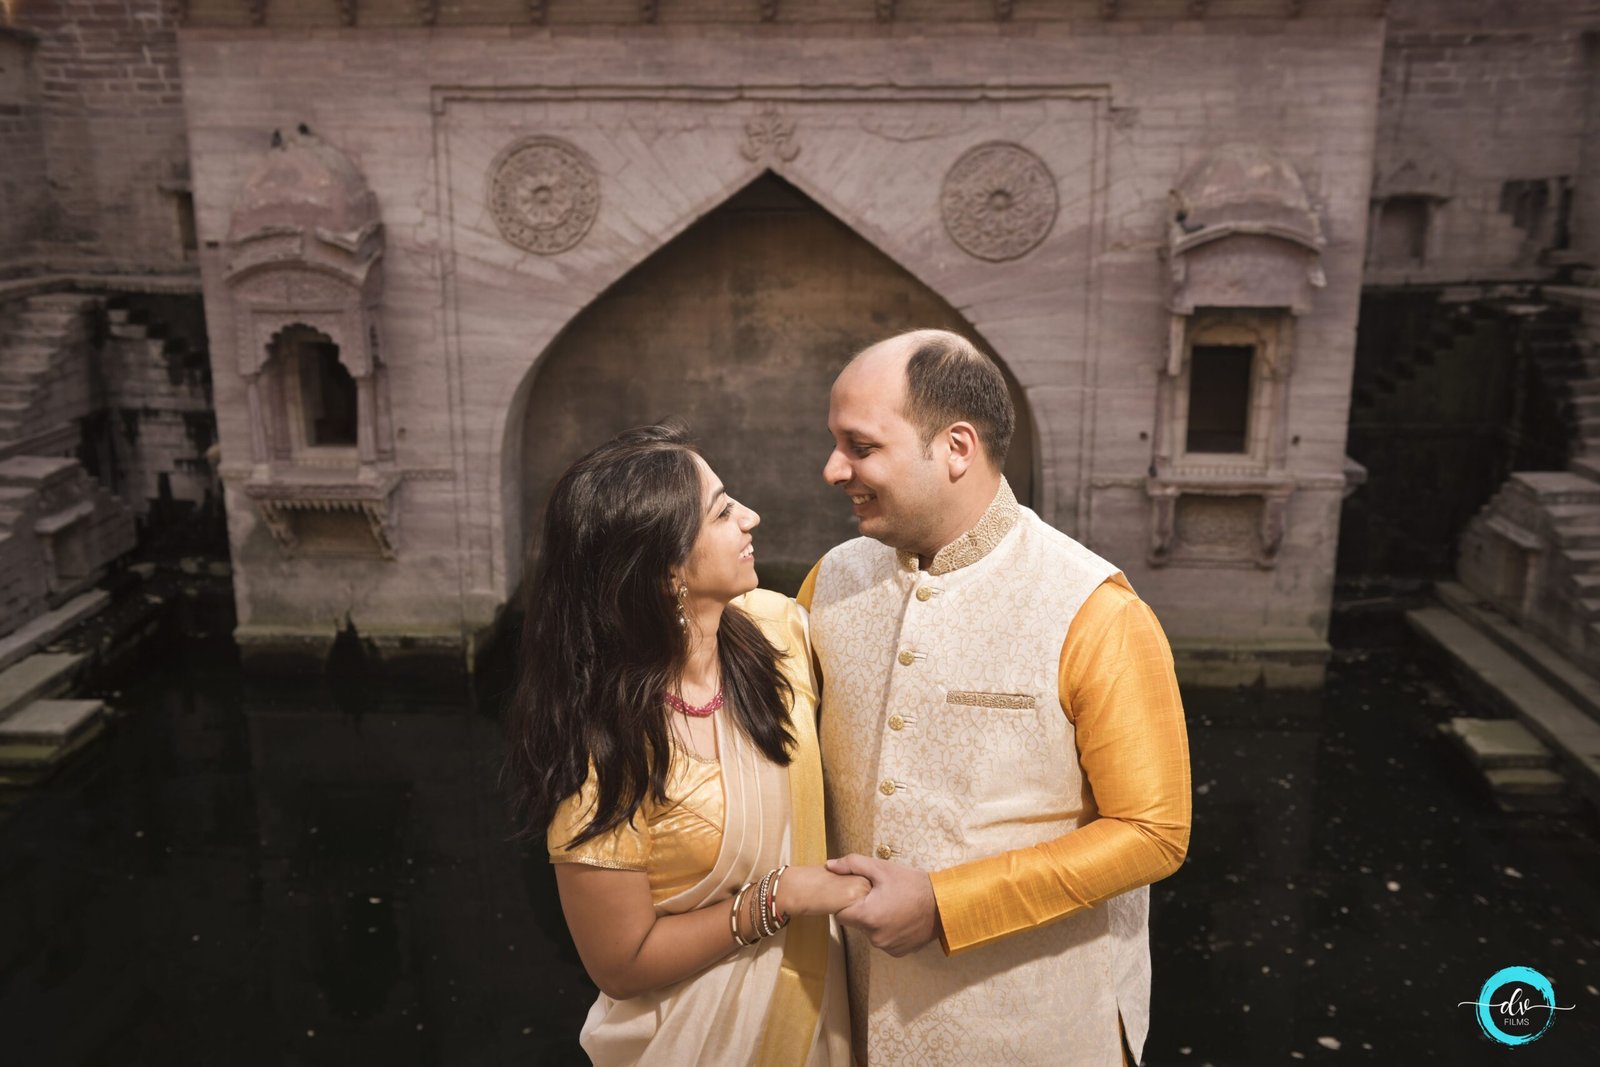 Great pre-wedding photoshoot locations in Delhi | Times of India